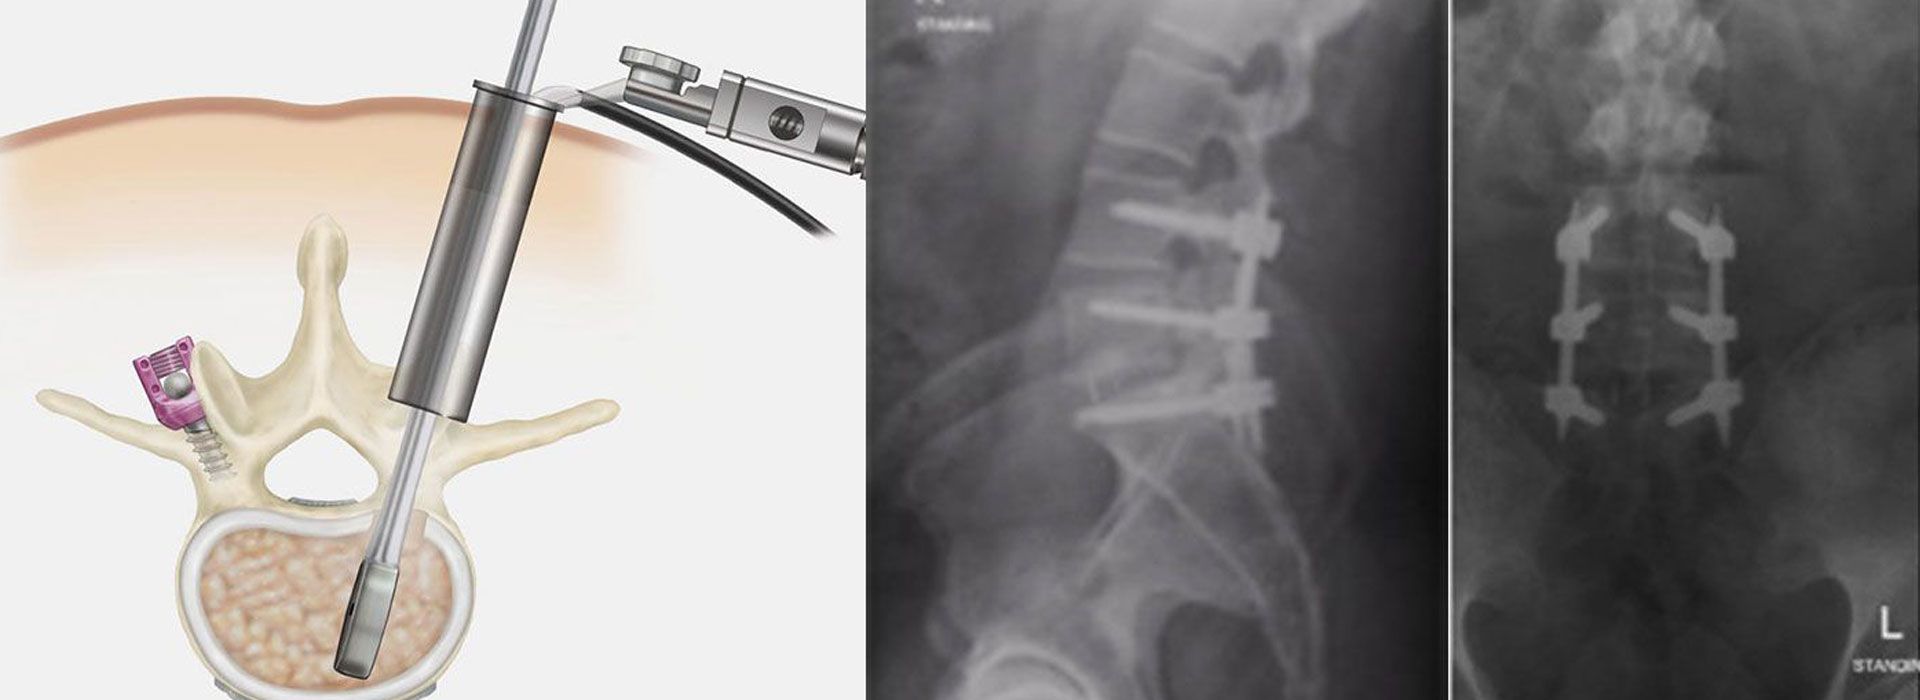 Minimally invasive and navigation guided spine surgery